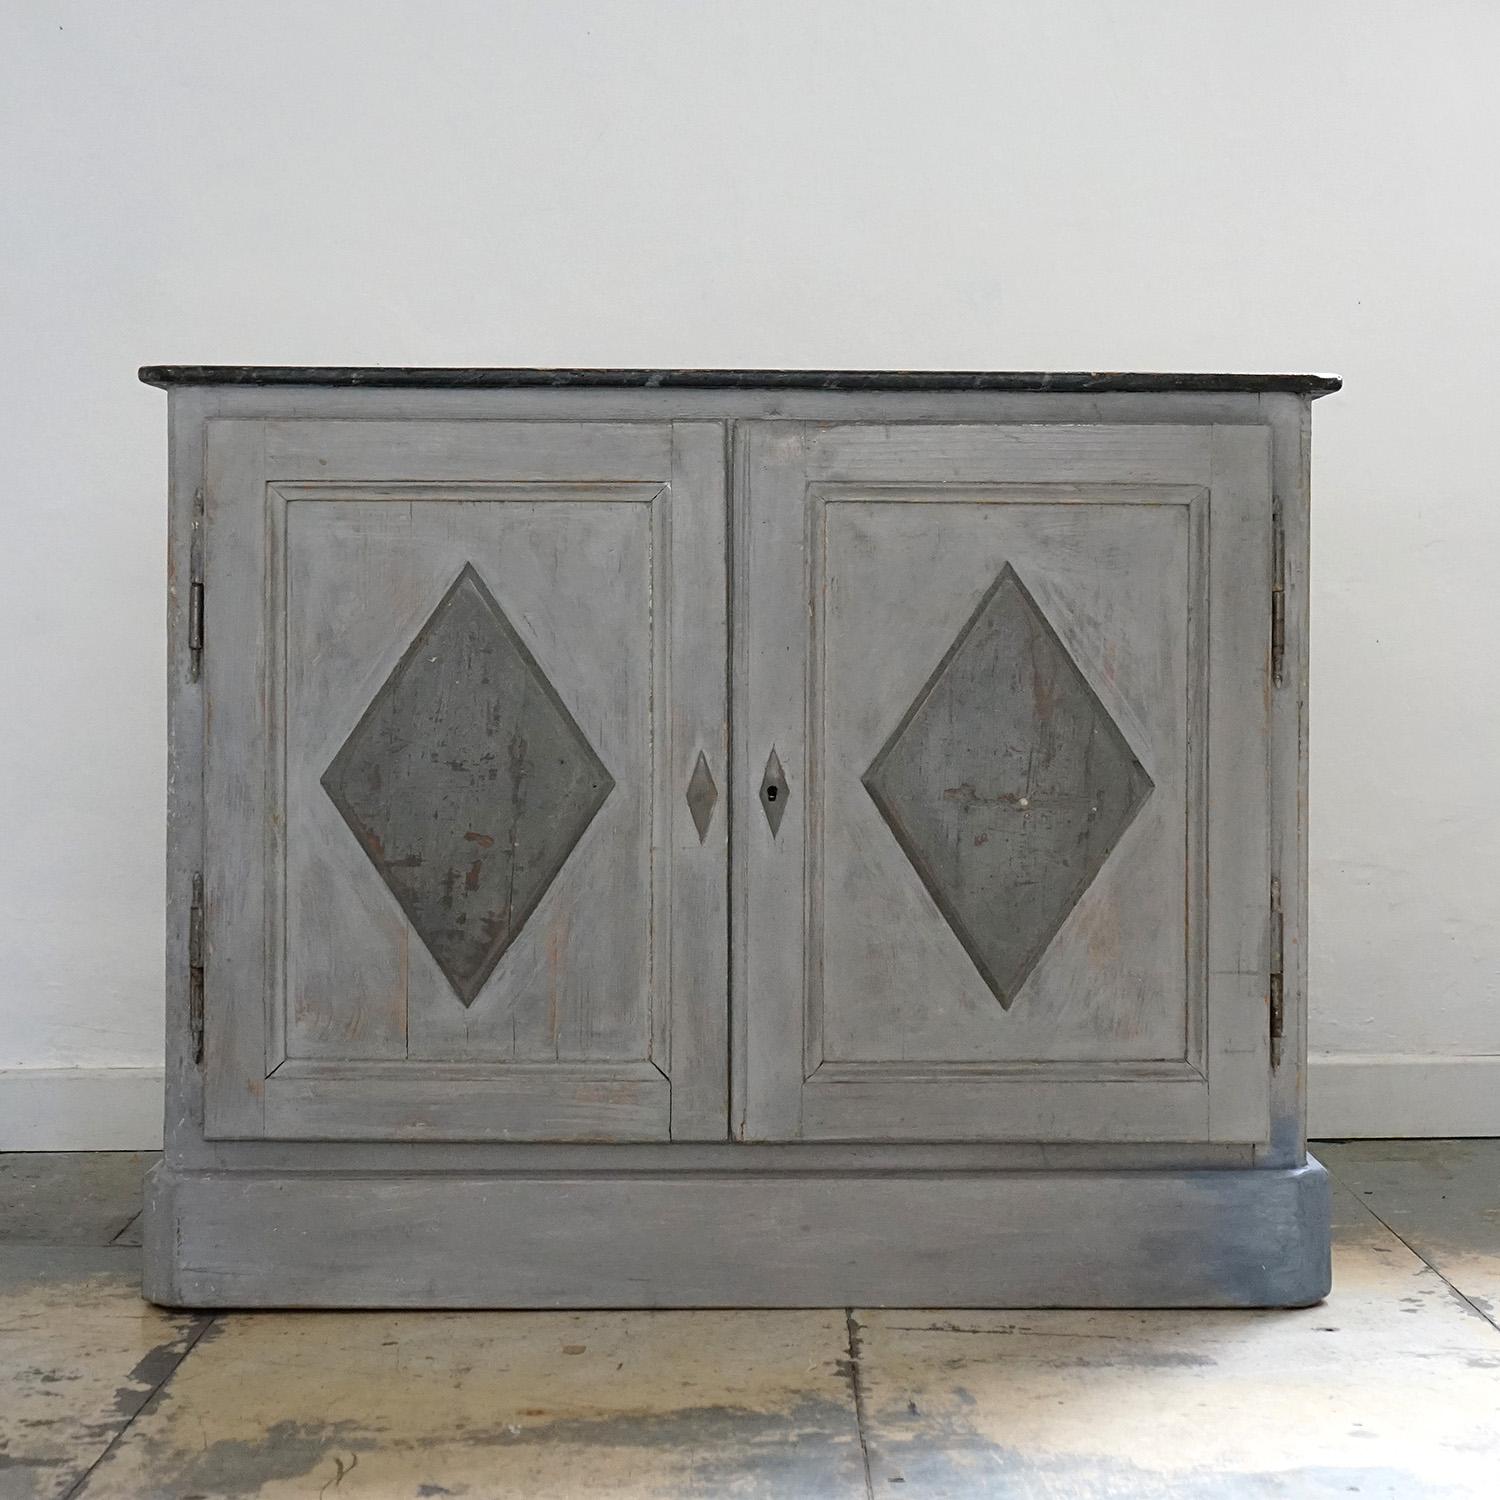 ANTIQUE LOW CUPBOARD.
A darker grey painted top above a mid-grey carved lozenge-shaped panelled doors on a light, almost silvery grey ground.
 
A removable internal shelf.
 
It is in good vintage condition and is structurally sound, there is some